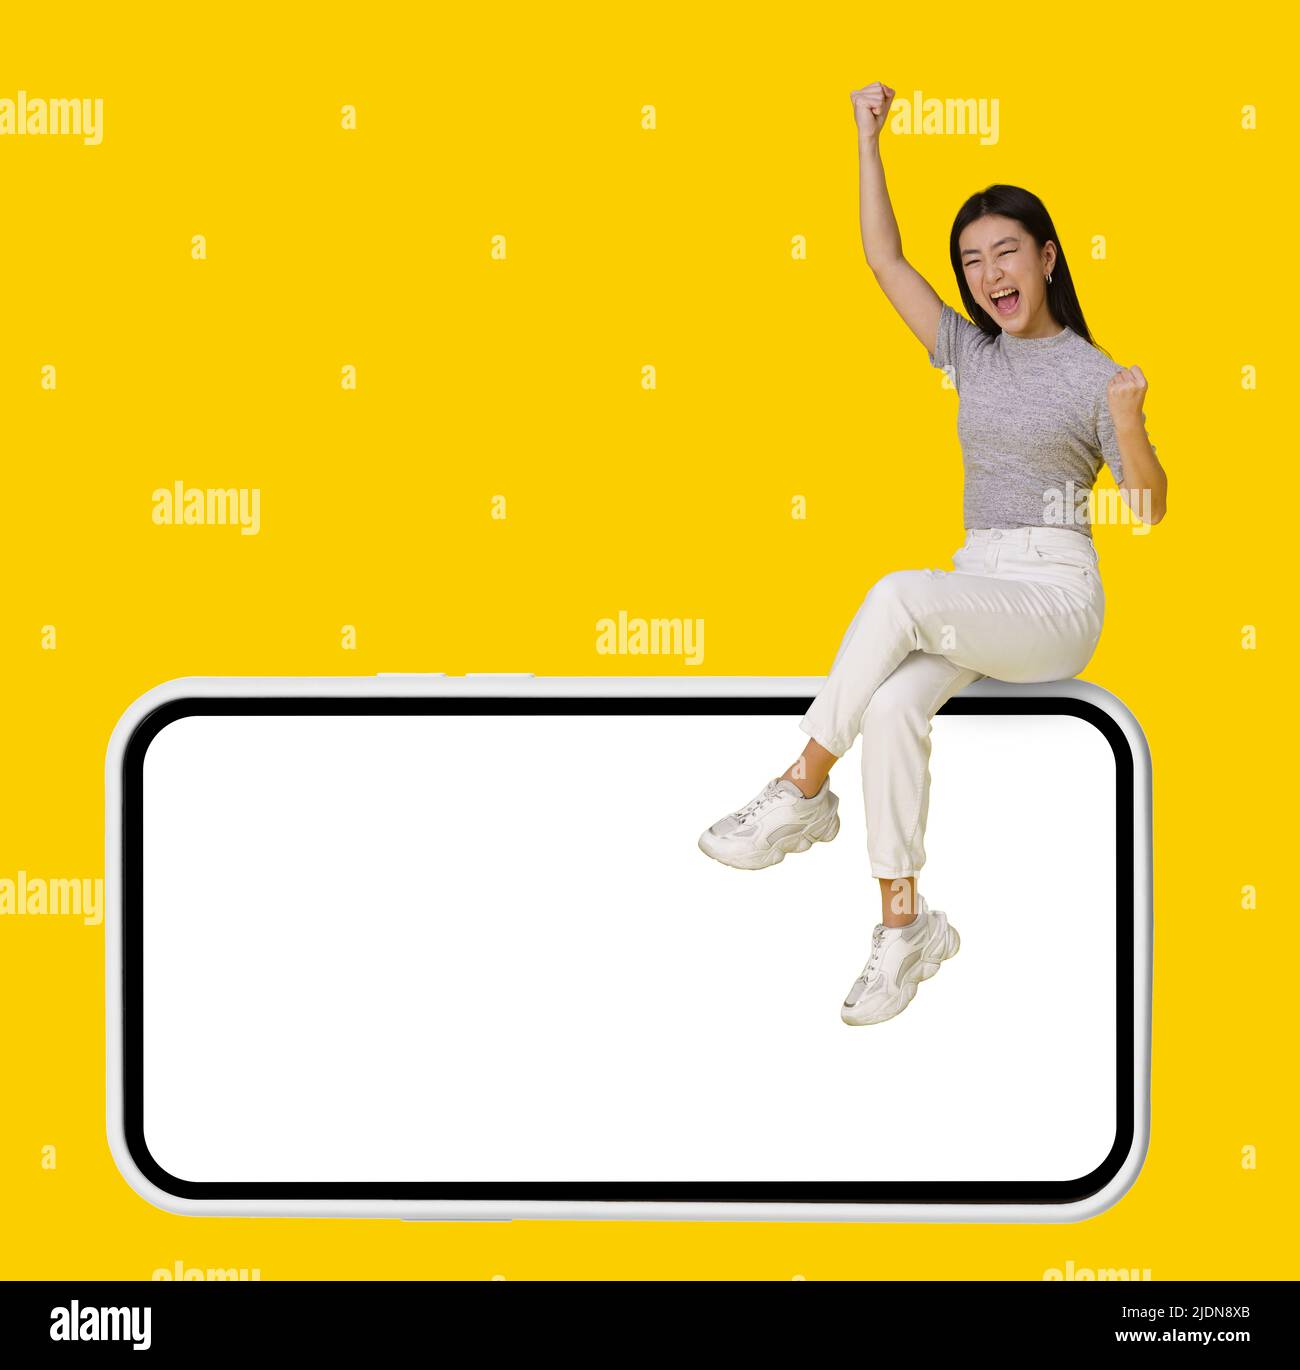 Excited with hands lifted is victory asian girl sitting on giant, huge smartphone with white screen isolated on yellow background. Mock up product placement for mobile app advertisement. Copy space.  Stock Photo